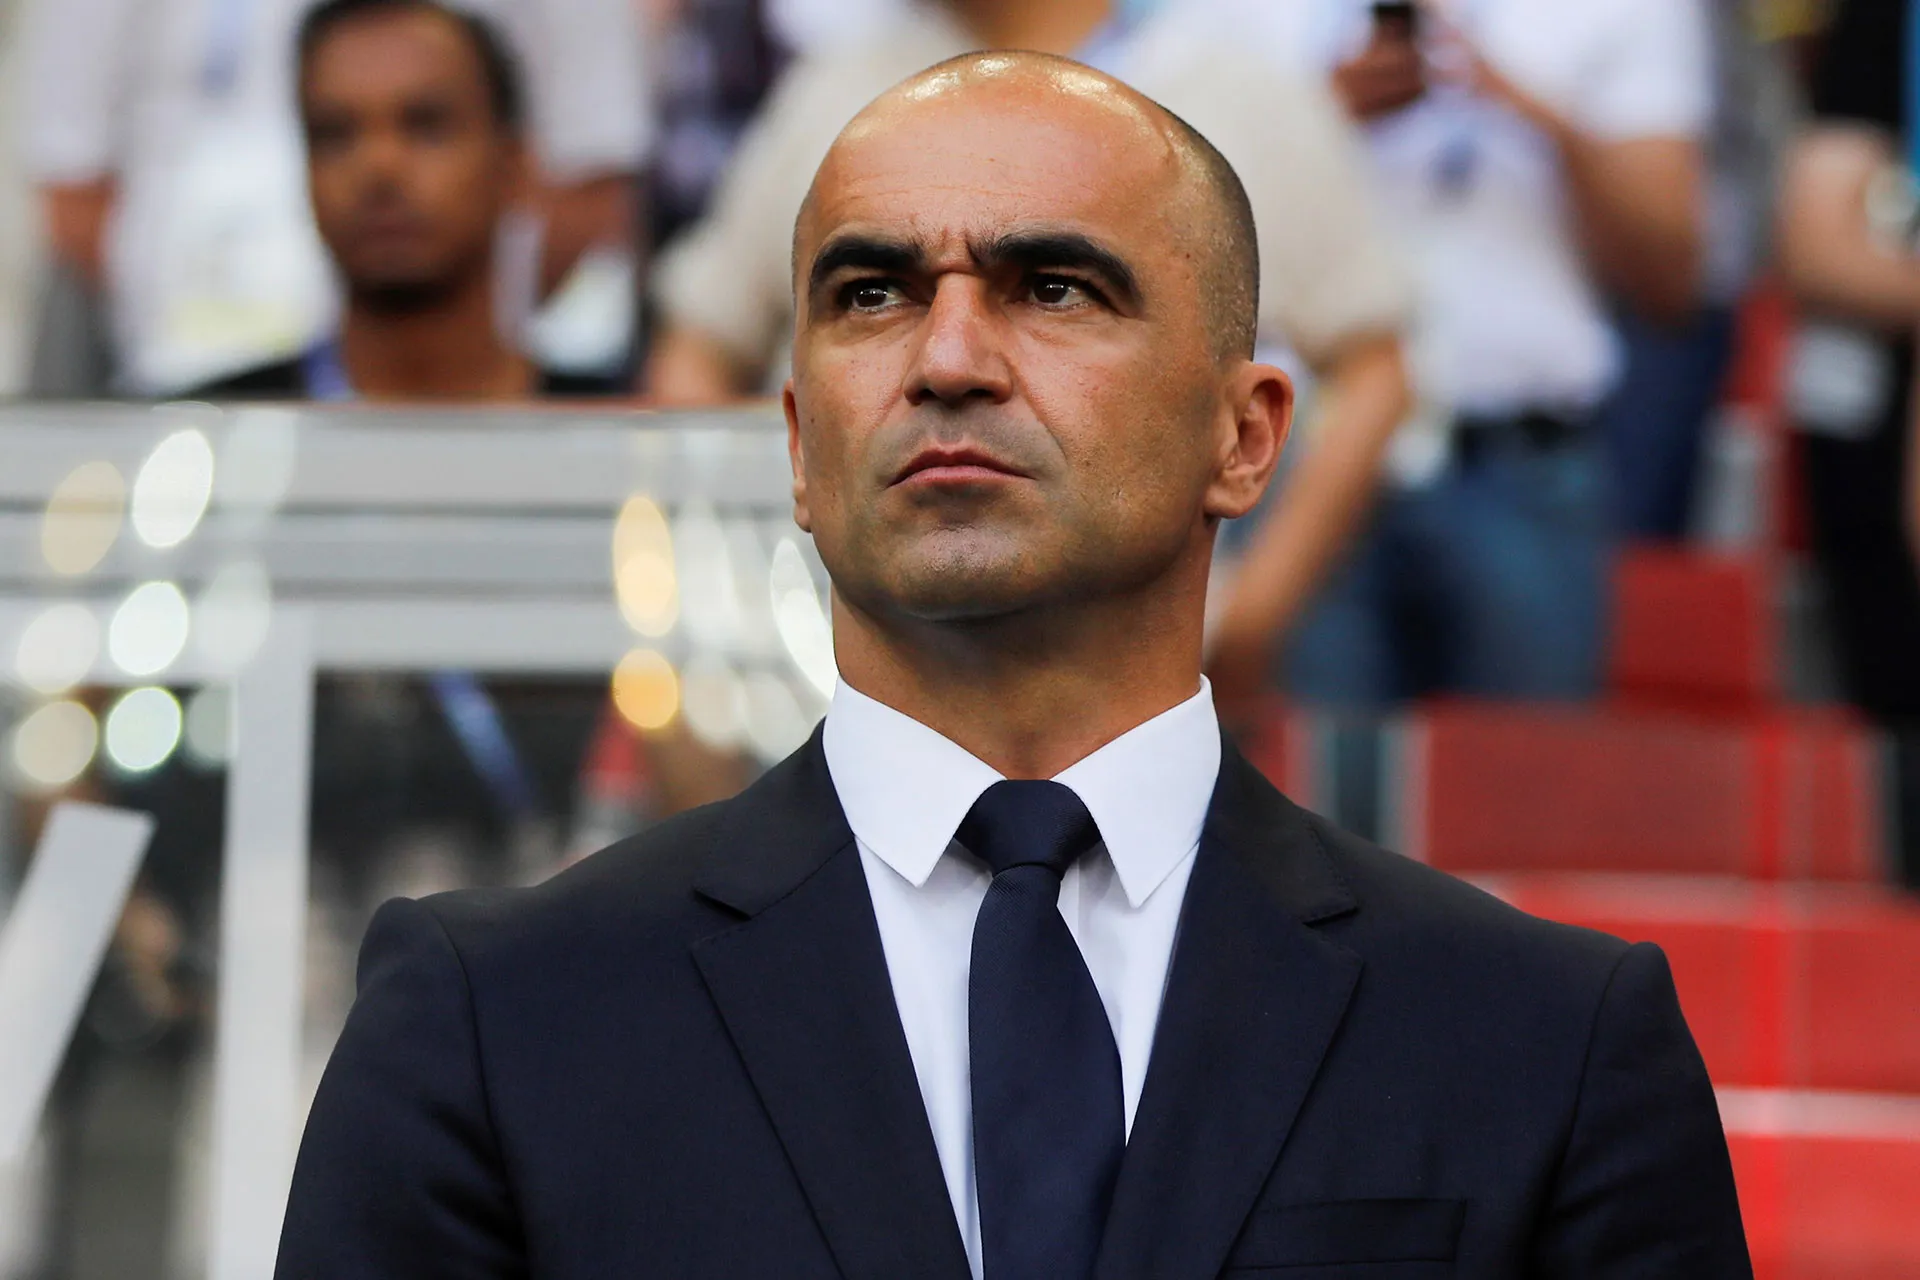 Roberto Martinez steps down as Belgium's coach after early World Cup exit